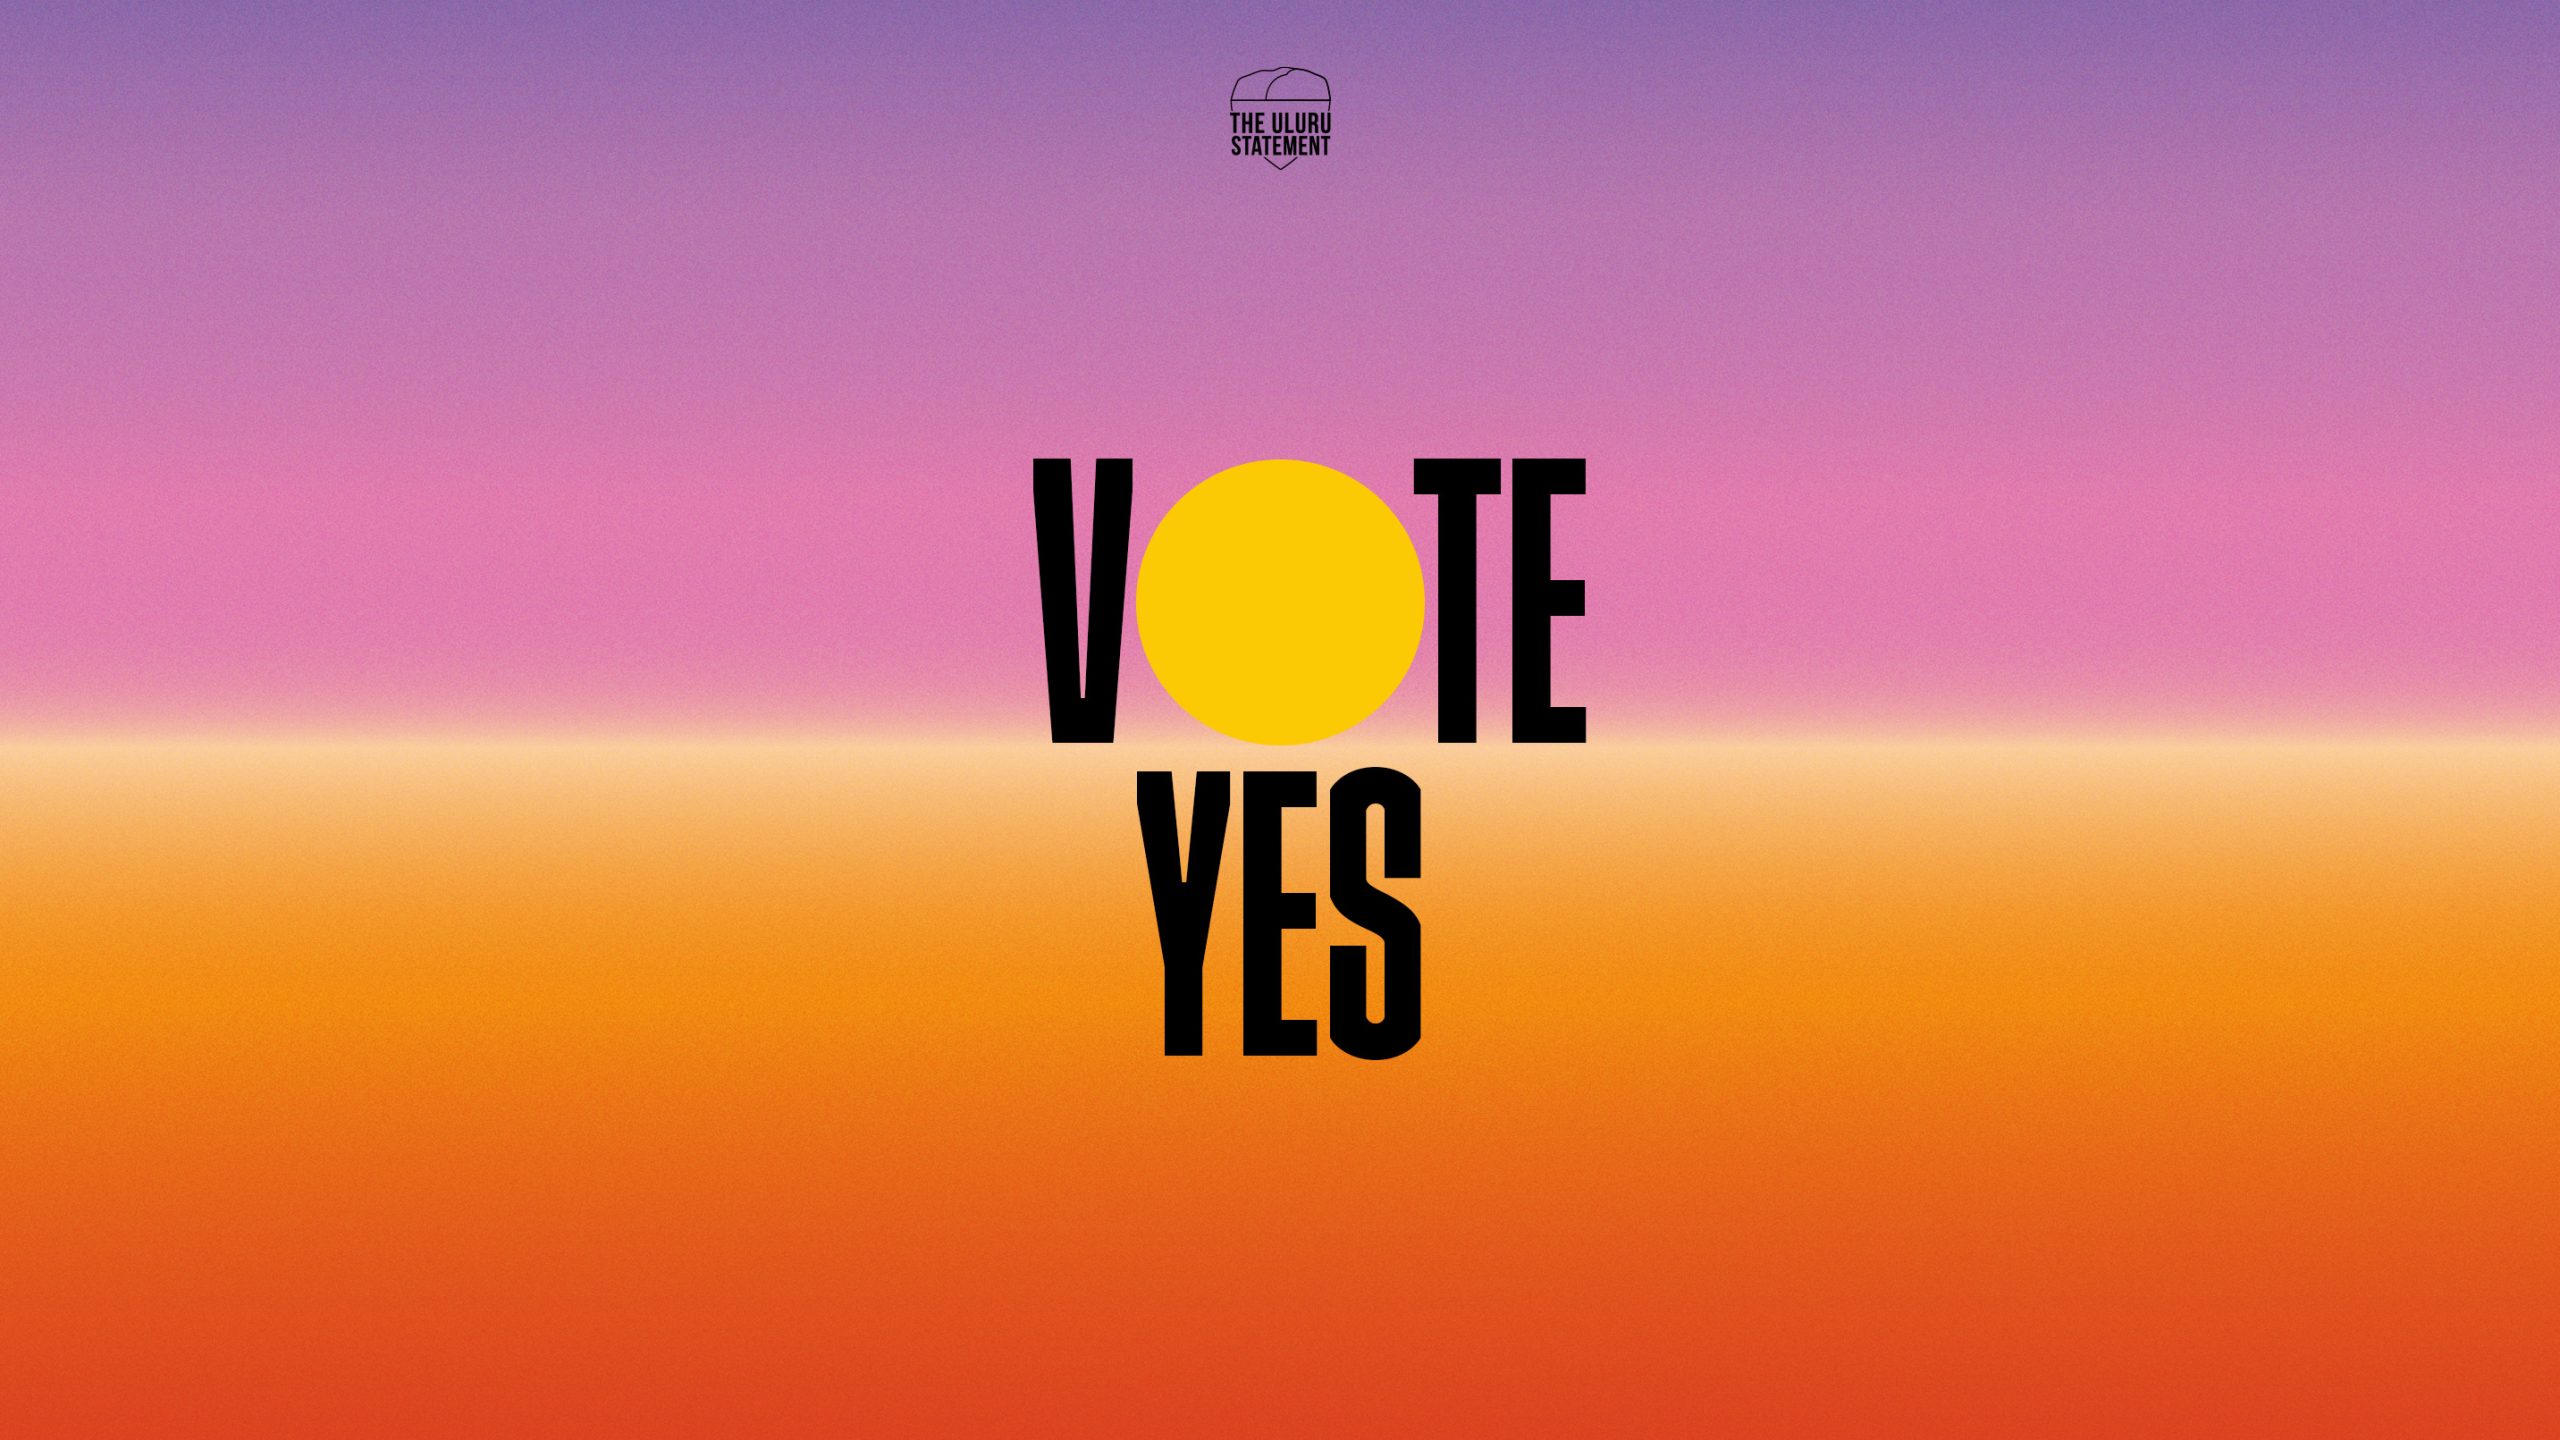 "VOTE YES" black text on a horizon where the land is represented with gradient of orange and the sky is represented by a gradient of pink to purple. The "O" is a yellow circle which represents the sun.